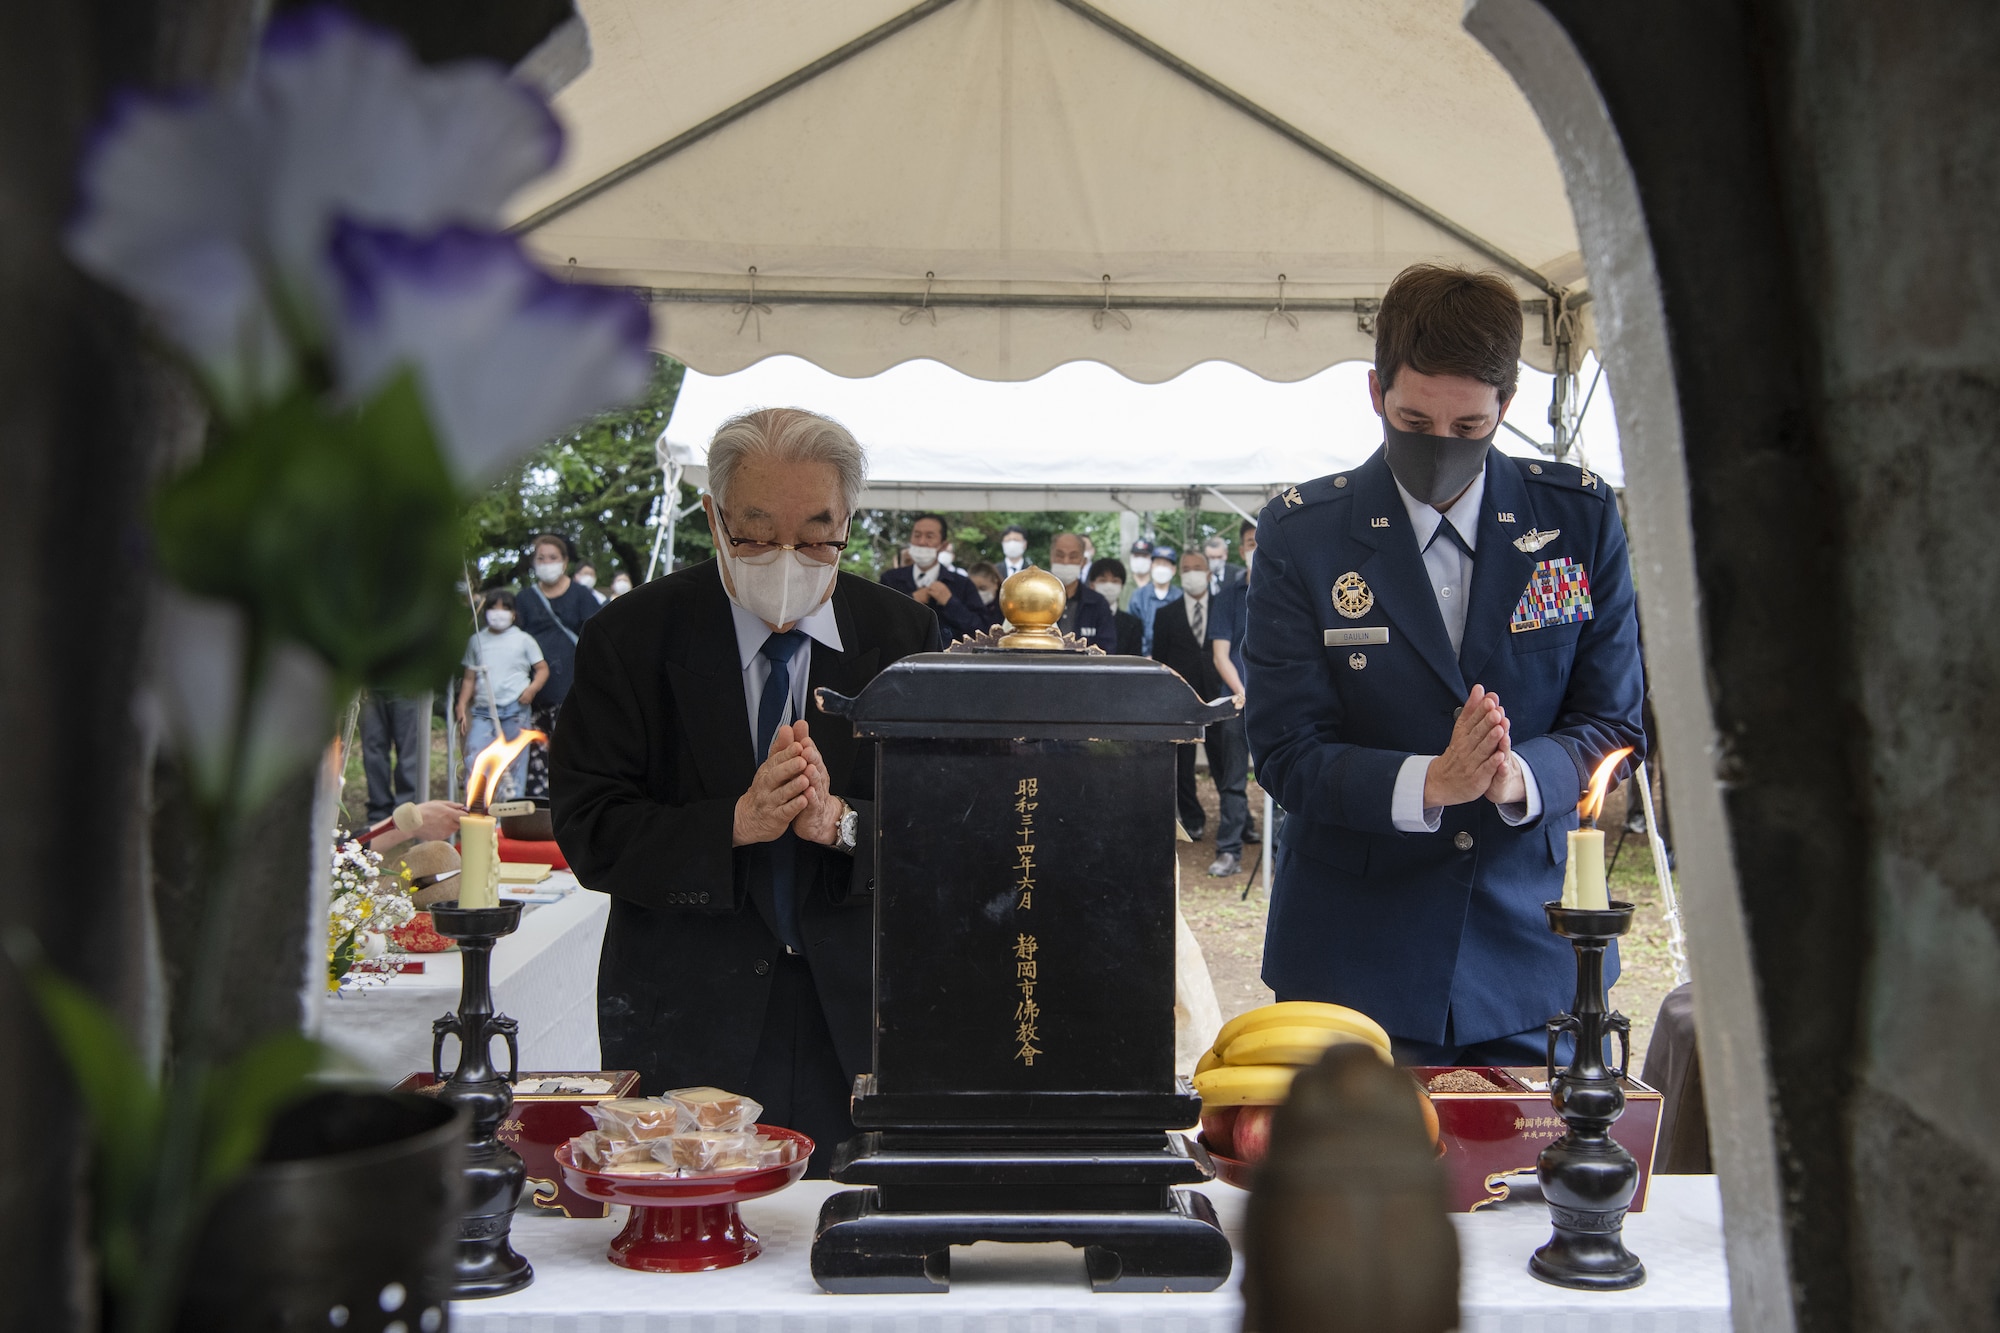 Dr. Hiroya Sugano, ceremony host, left, and U.S. Air Force Col. Julie Gaulin, 374th Airlift Wing vice commander, participate in an incense offering ceremony during a U.S.-Japan Joint Memorial Service June 11, 2022, at Mt. Shizuhata, Shizuoka city, Japan. The memorial service provided participants the opportunity to honor those who lost their lives during a World War II air raid on June 20, 1945. During the raid, two U.S. Army Air Forces B-29 Superfortresses collided mid-air over Shizuoka City, resulting in the death of 23 Airmen on board the aircraft. Representatives of the U.S. Air Force’s Yokota Air Base, Japan Self Defense Force, and Shizuoka City rendered their respects to the Airmen and Japanese civilians who lost their lives as a result of the tragedy, and reflected on the strong alliance the U.S. and Japan have forged since the end of World War II. (U.S. Air Force photo by Tech. Sgt. Christopher Hubenthal)